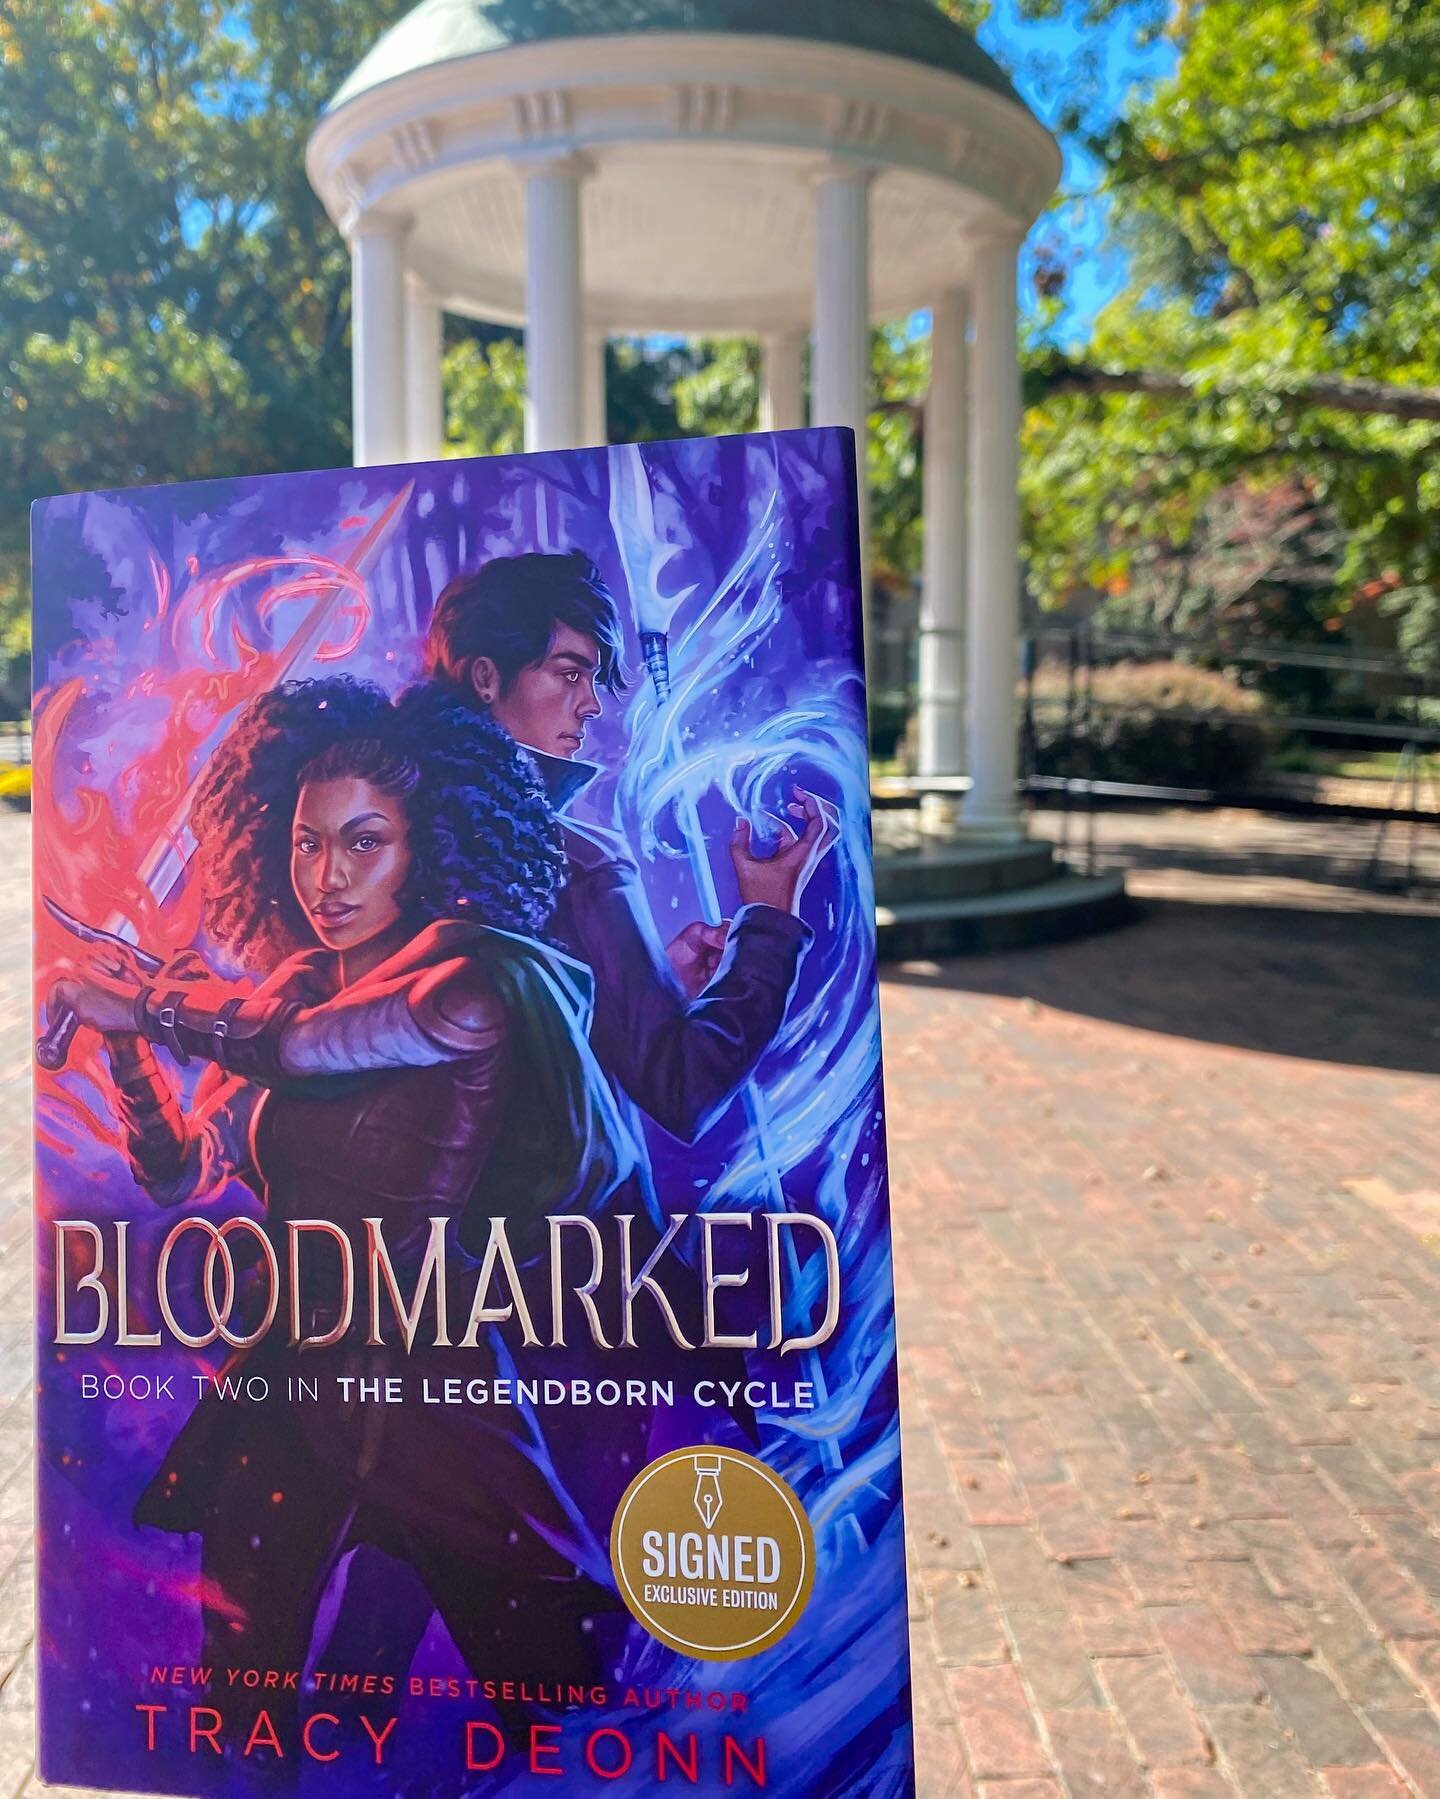 To cap off the month of ✨NovemBree✨ Barnes &amp; Noble will have SIGNED copies of the B&amp;N Exclusive Edition of BLOODMARKED available in-store only this Black Friday 🎉🎉🎉 

Quantities are limited and available in stores only. #bnsignededitions #